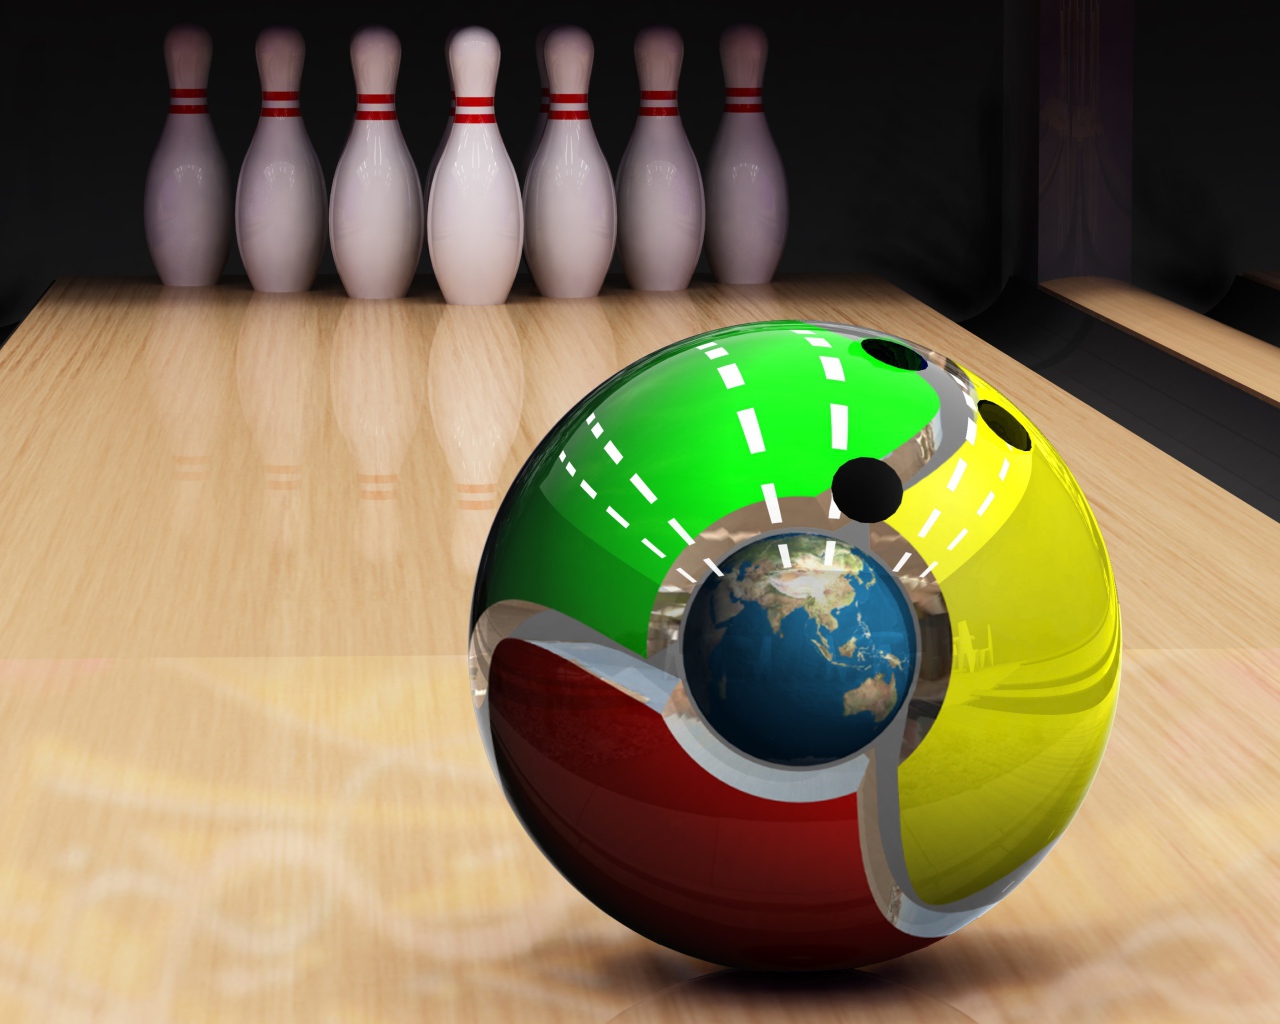 Sphere on the bowling alley in the background, 3d graphics